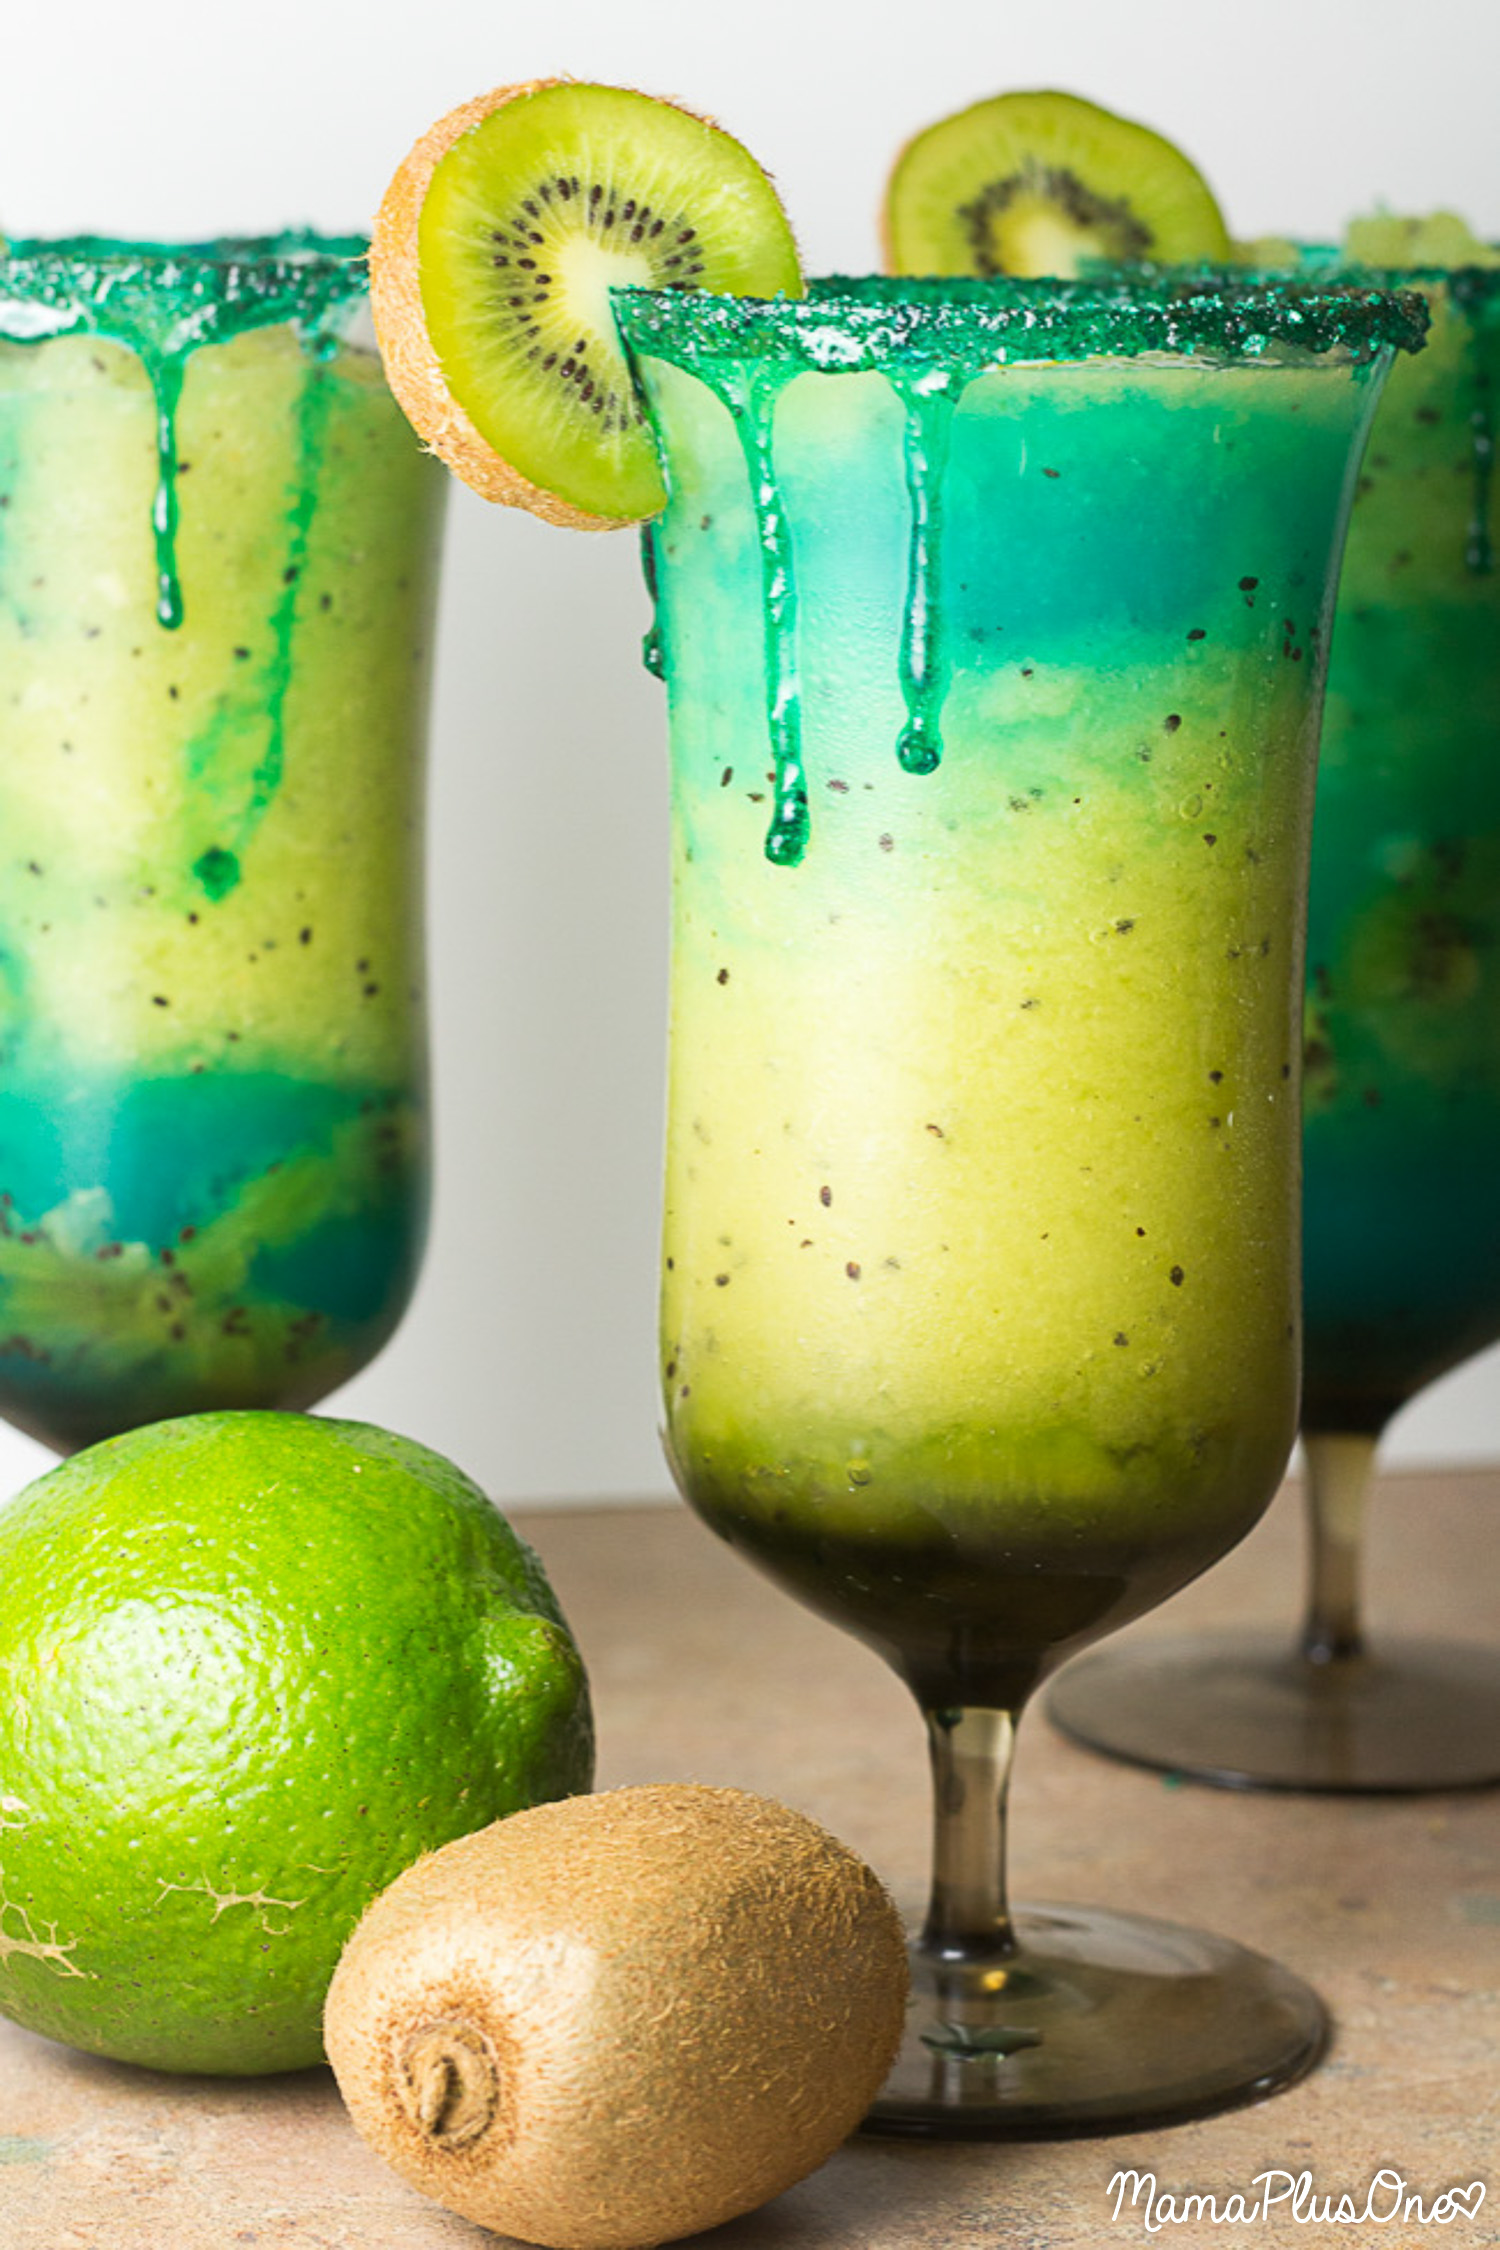 If you want all of the margarita fun and flavor and none of the alcohol, you'll love this totally virgin electric blue kiwi margarita! Hello, spring and summer! This has plenty of flavor-- lime and kiwi, blue and bright green, it's party-ready in no time. Virgin margarita recipe made quickly in your blender!